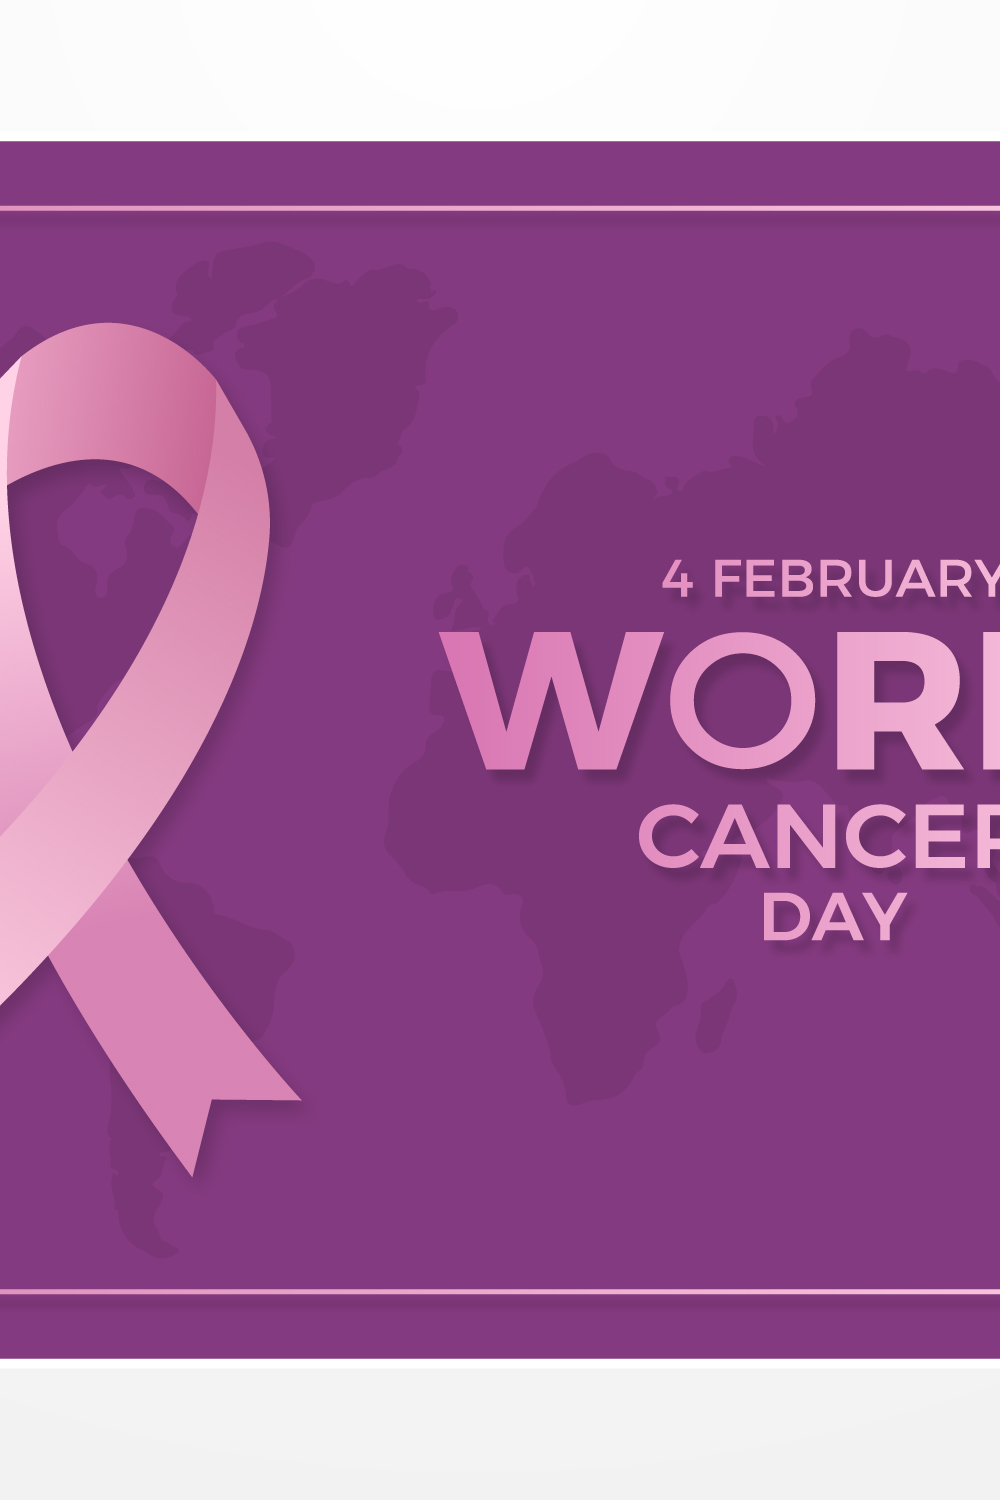 world cancer day pinterest preview image.